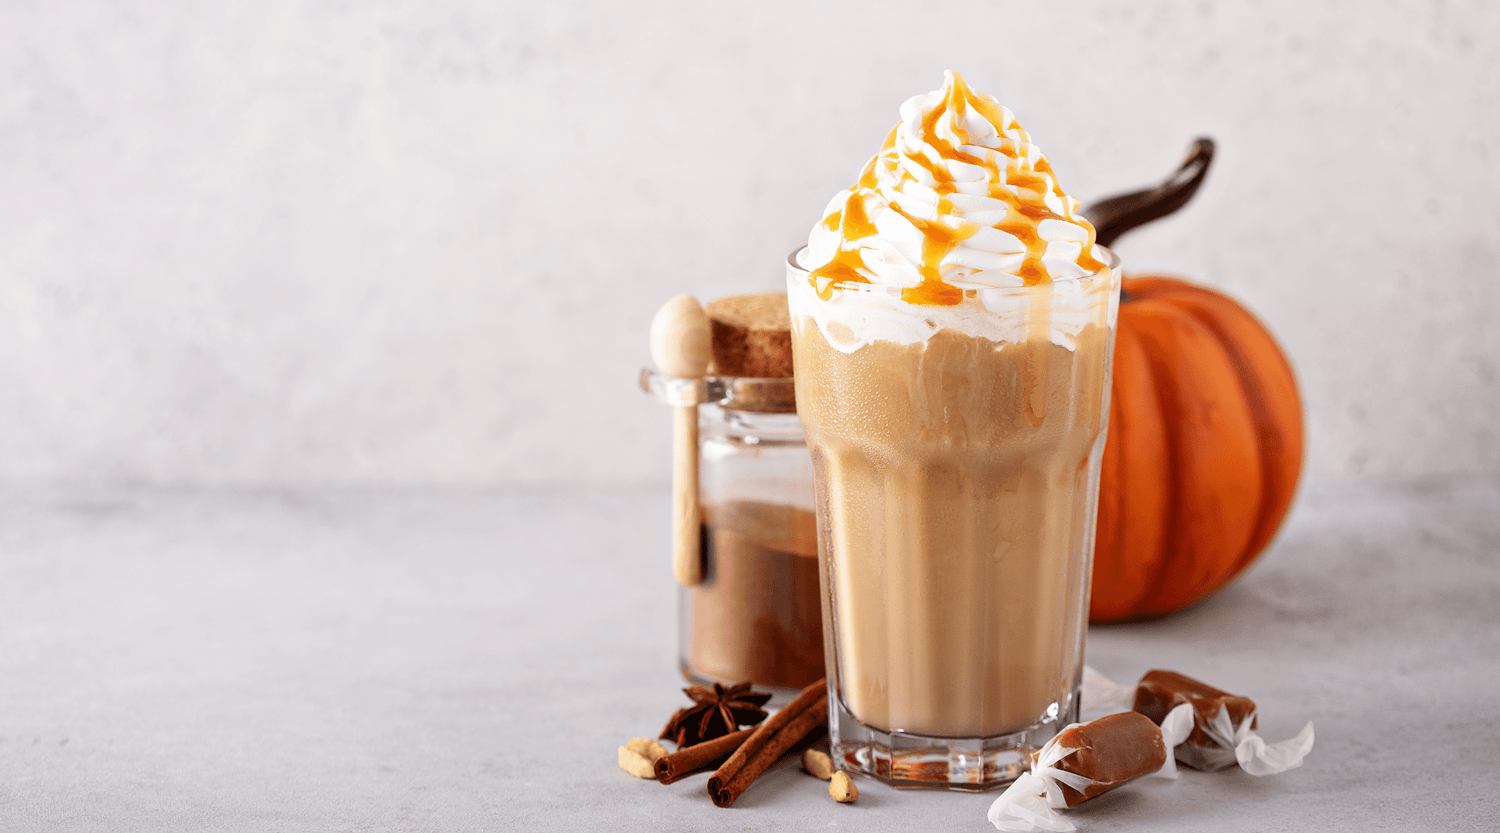 Spice up your drinks menu this Autumn